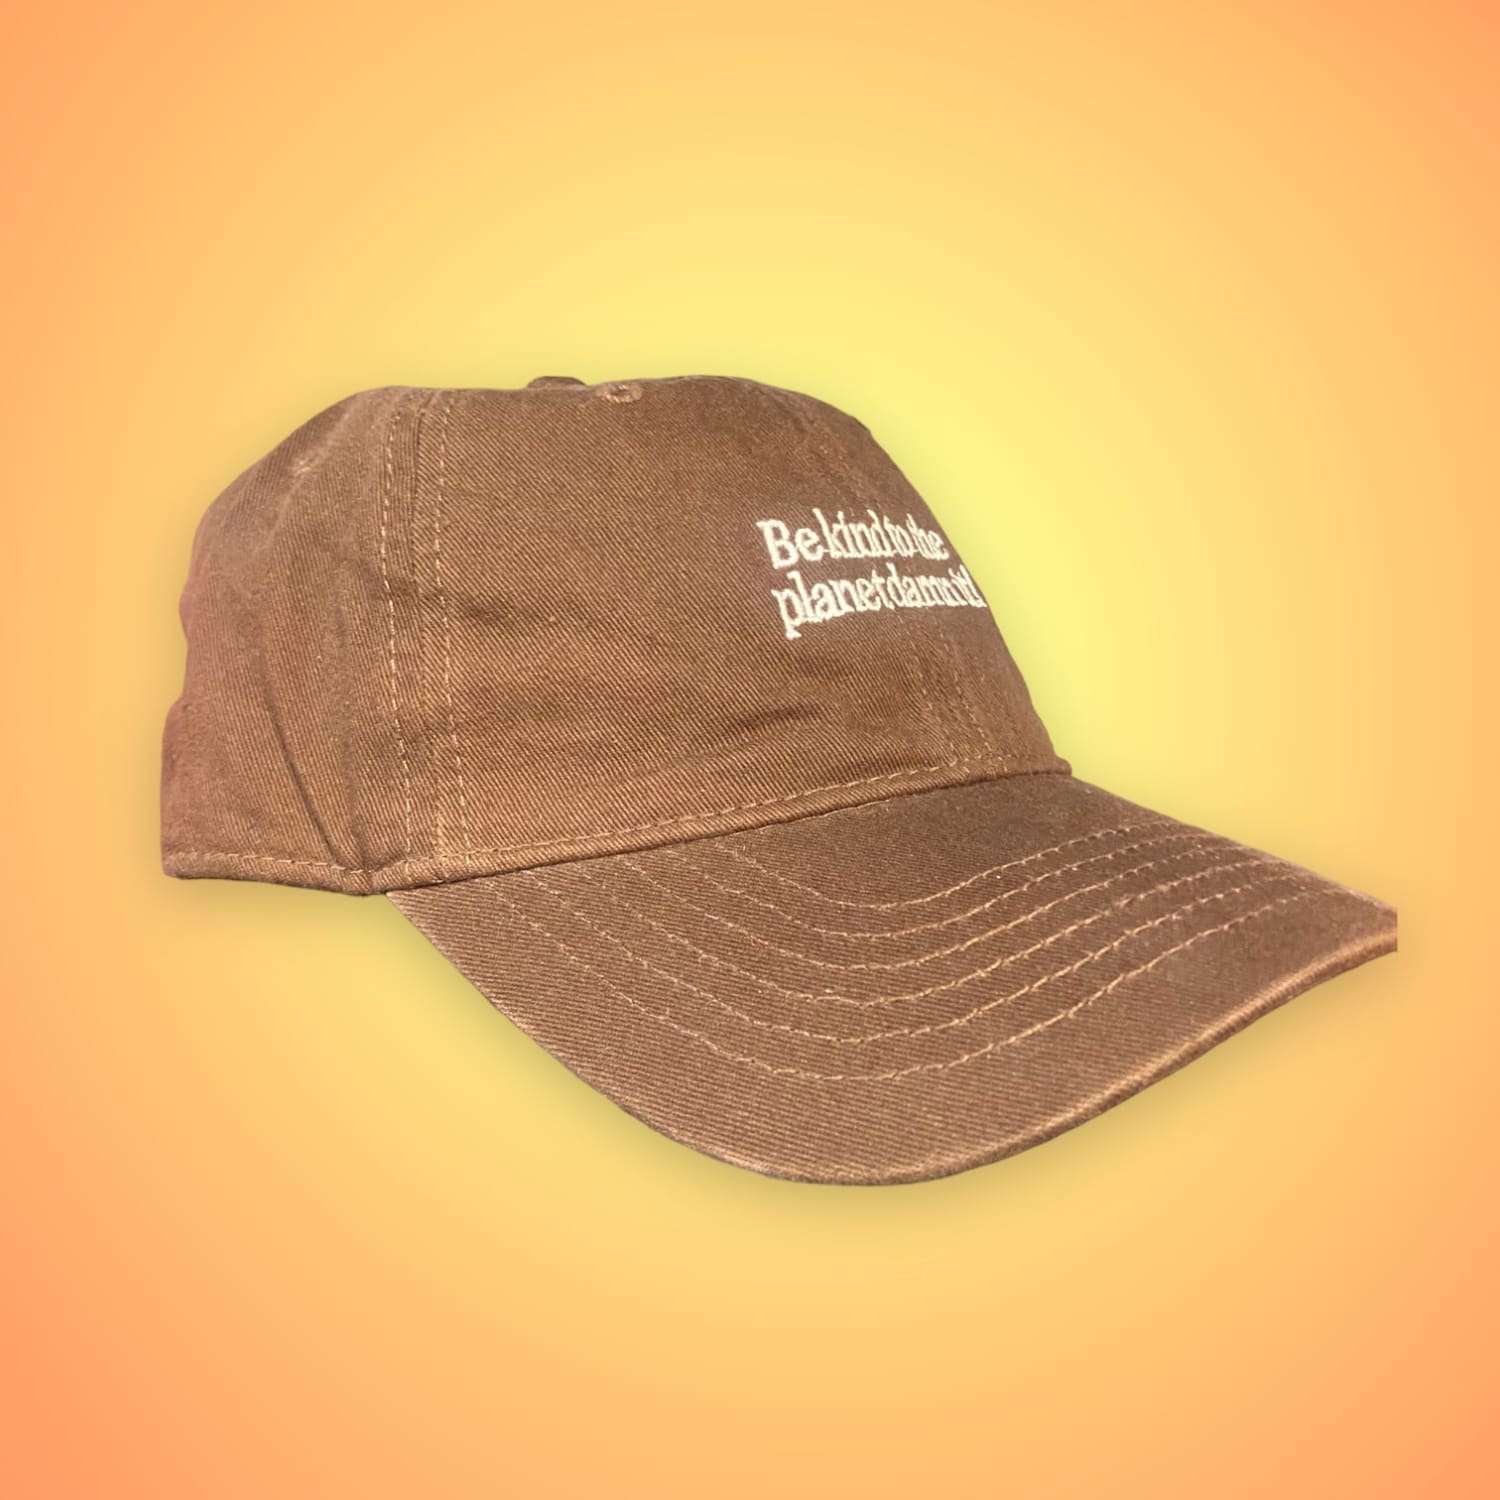 Be Kind To The Planet Dad Hat - Brown Brown - Dad Day - Hat